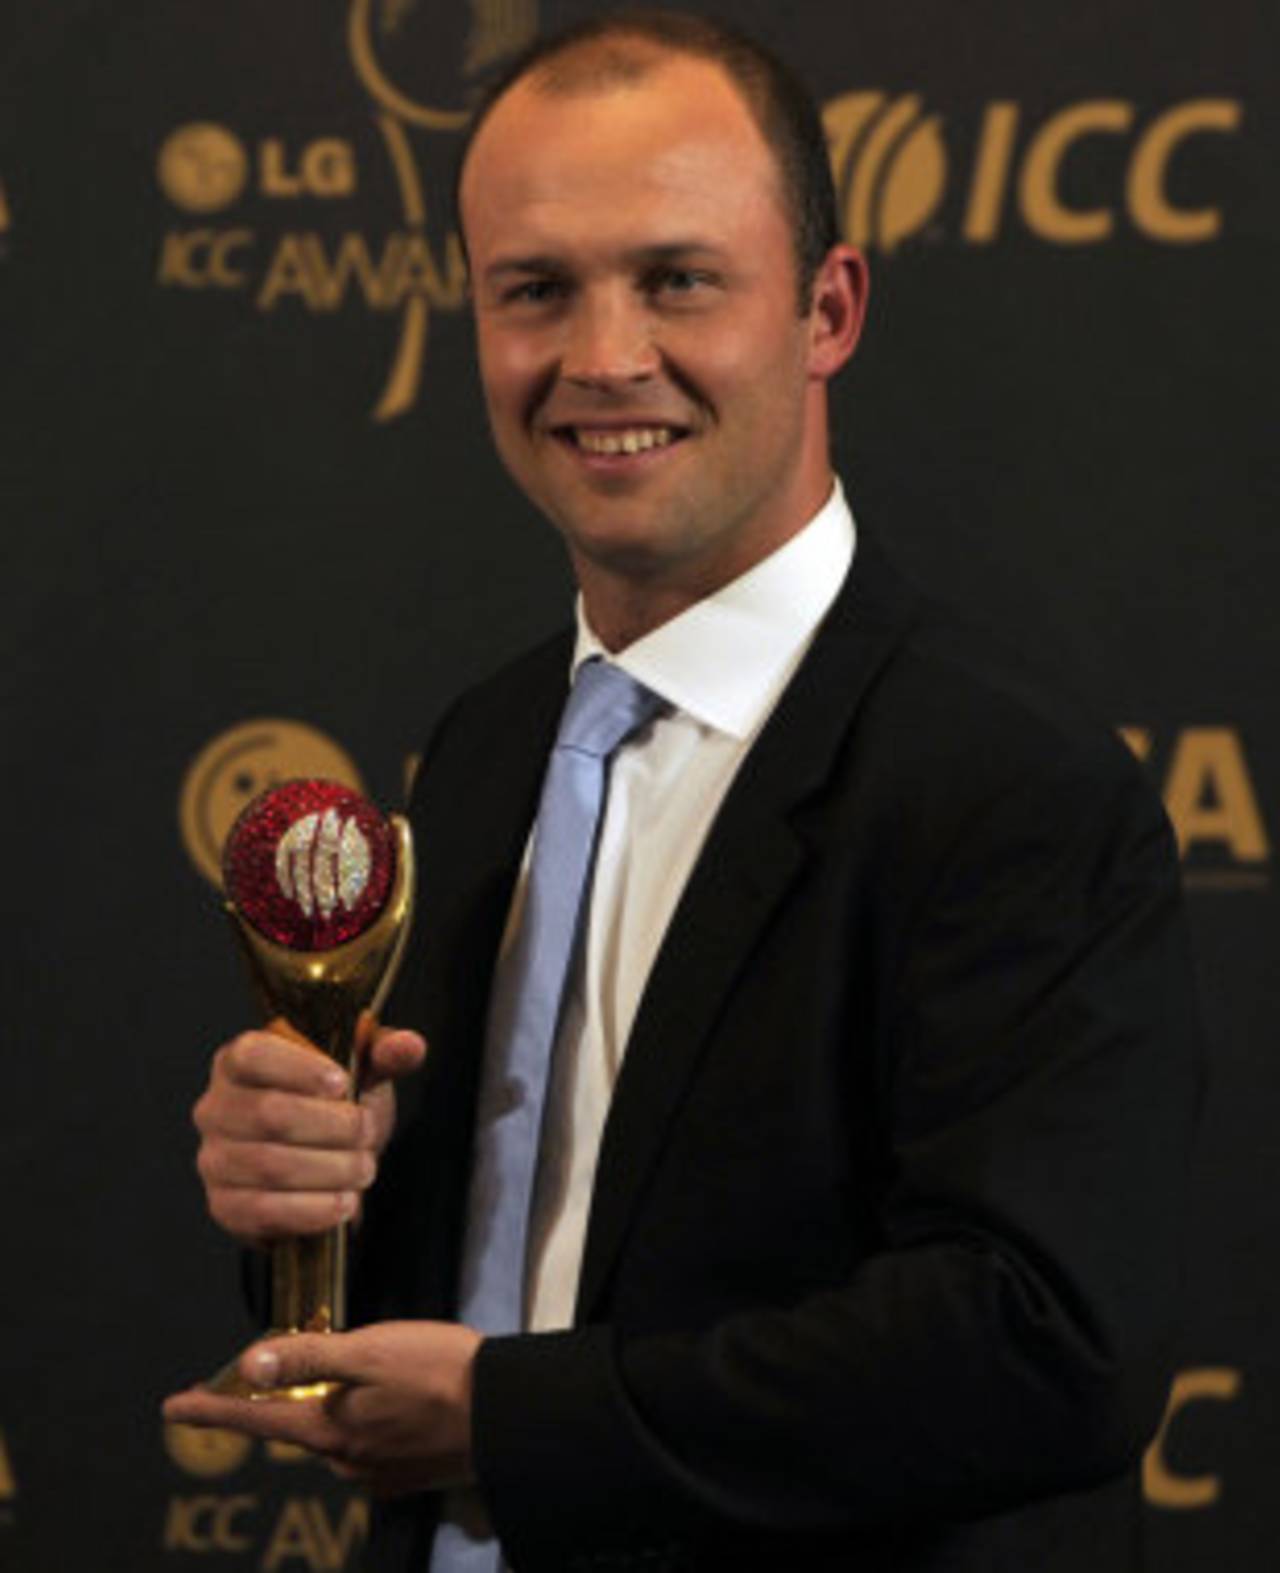 Jonathan Trott was named ICC Cricketer of the Year, ICC Awards, London, September 12, 2011